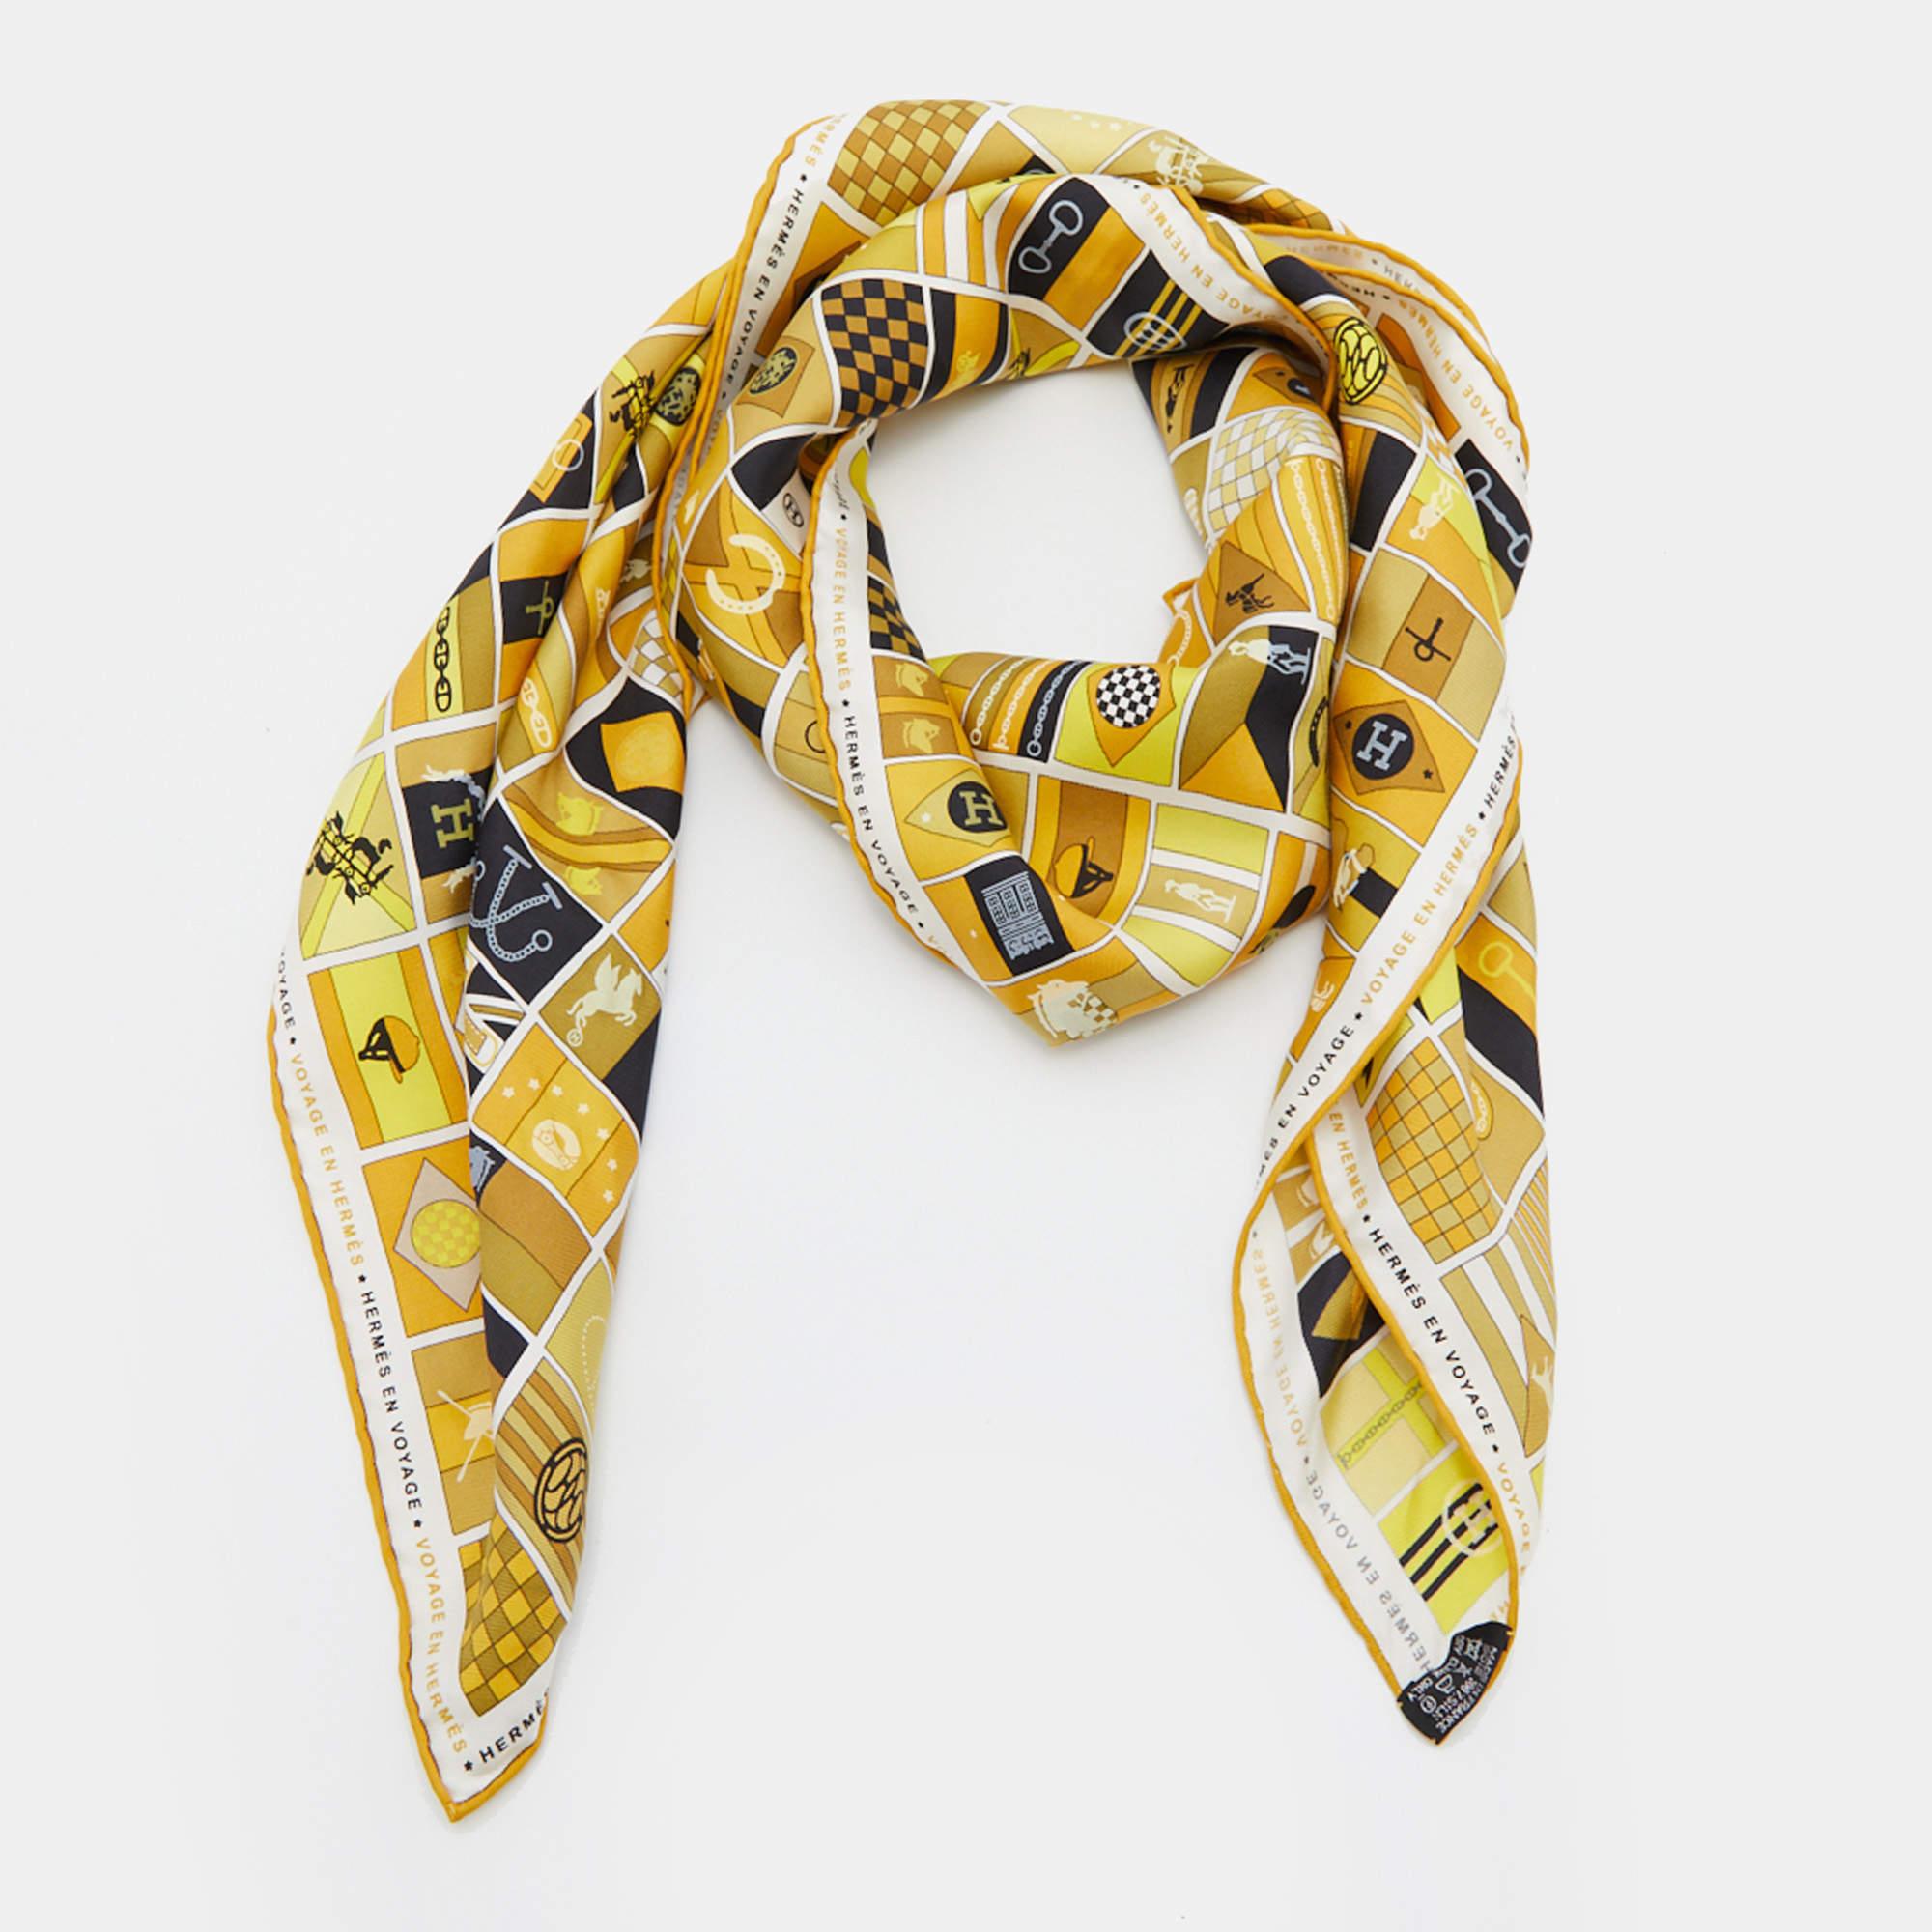 The craftspeople at Hermes have designed this scarf with intricate details and quality silk. It has gorgeous prints and neatly hemmed edges. Style it around your neck or shoulders.

